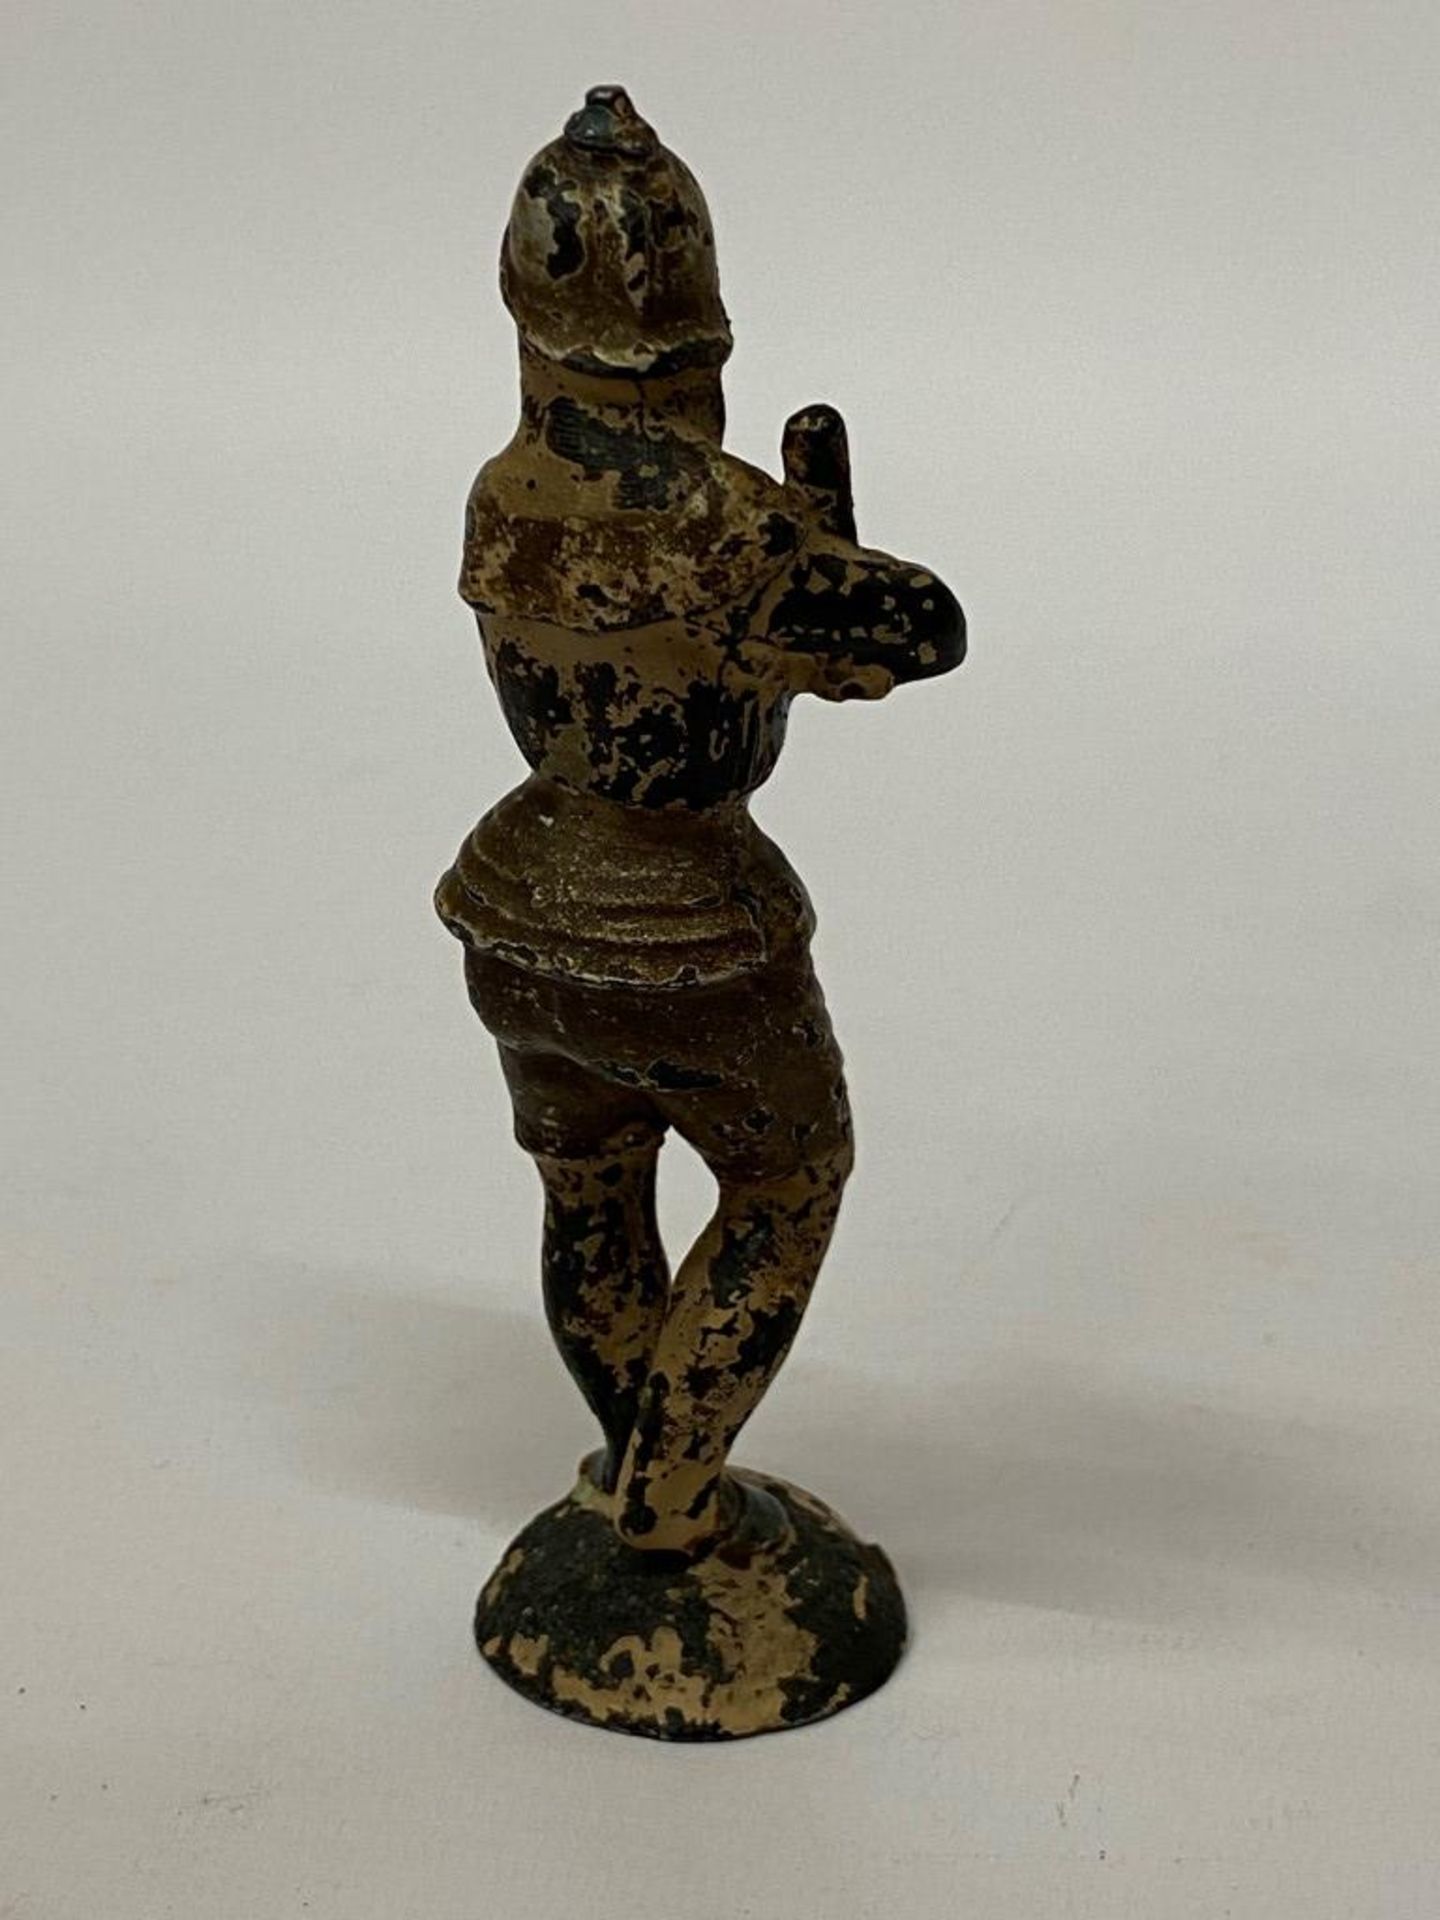 AN UNUSUAL, POSSIBLY BRONZE, MODEL OF A SWORDSMAN - Image 2 of 3